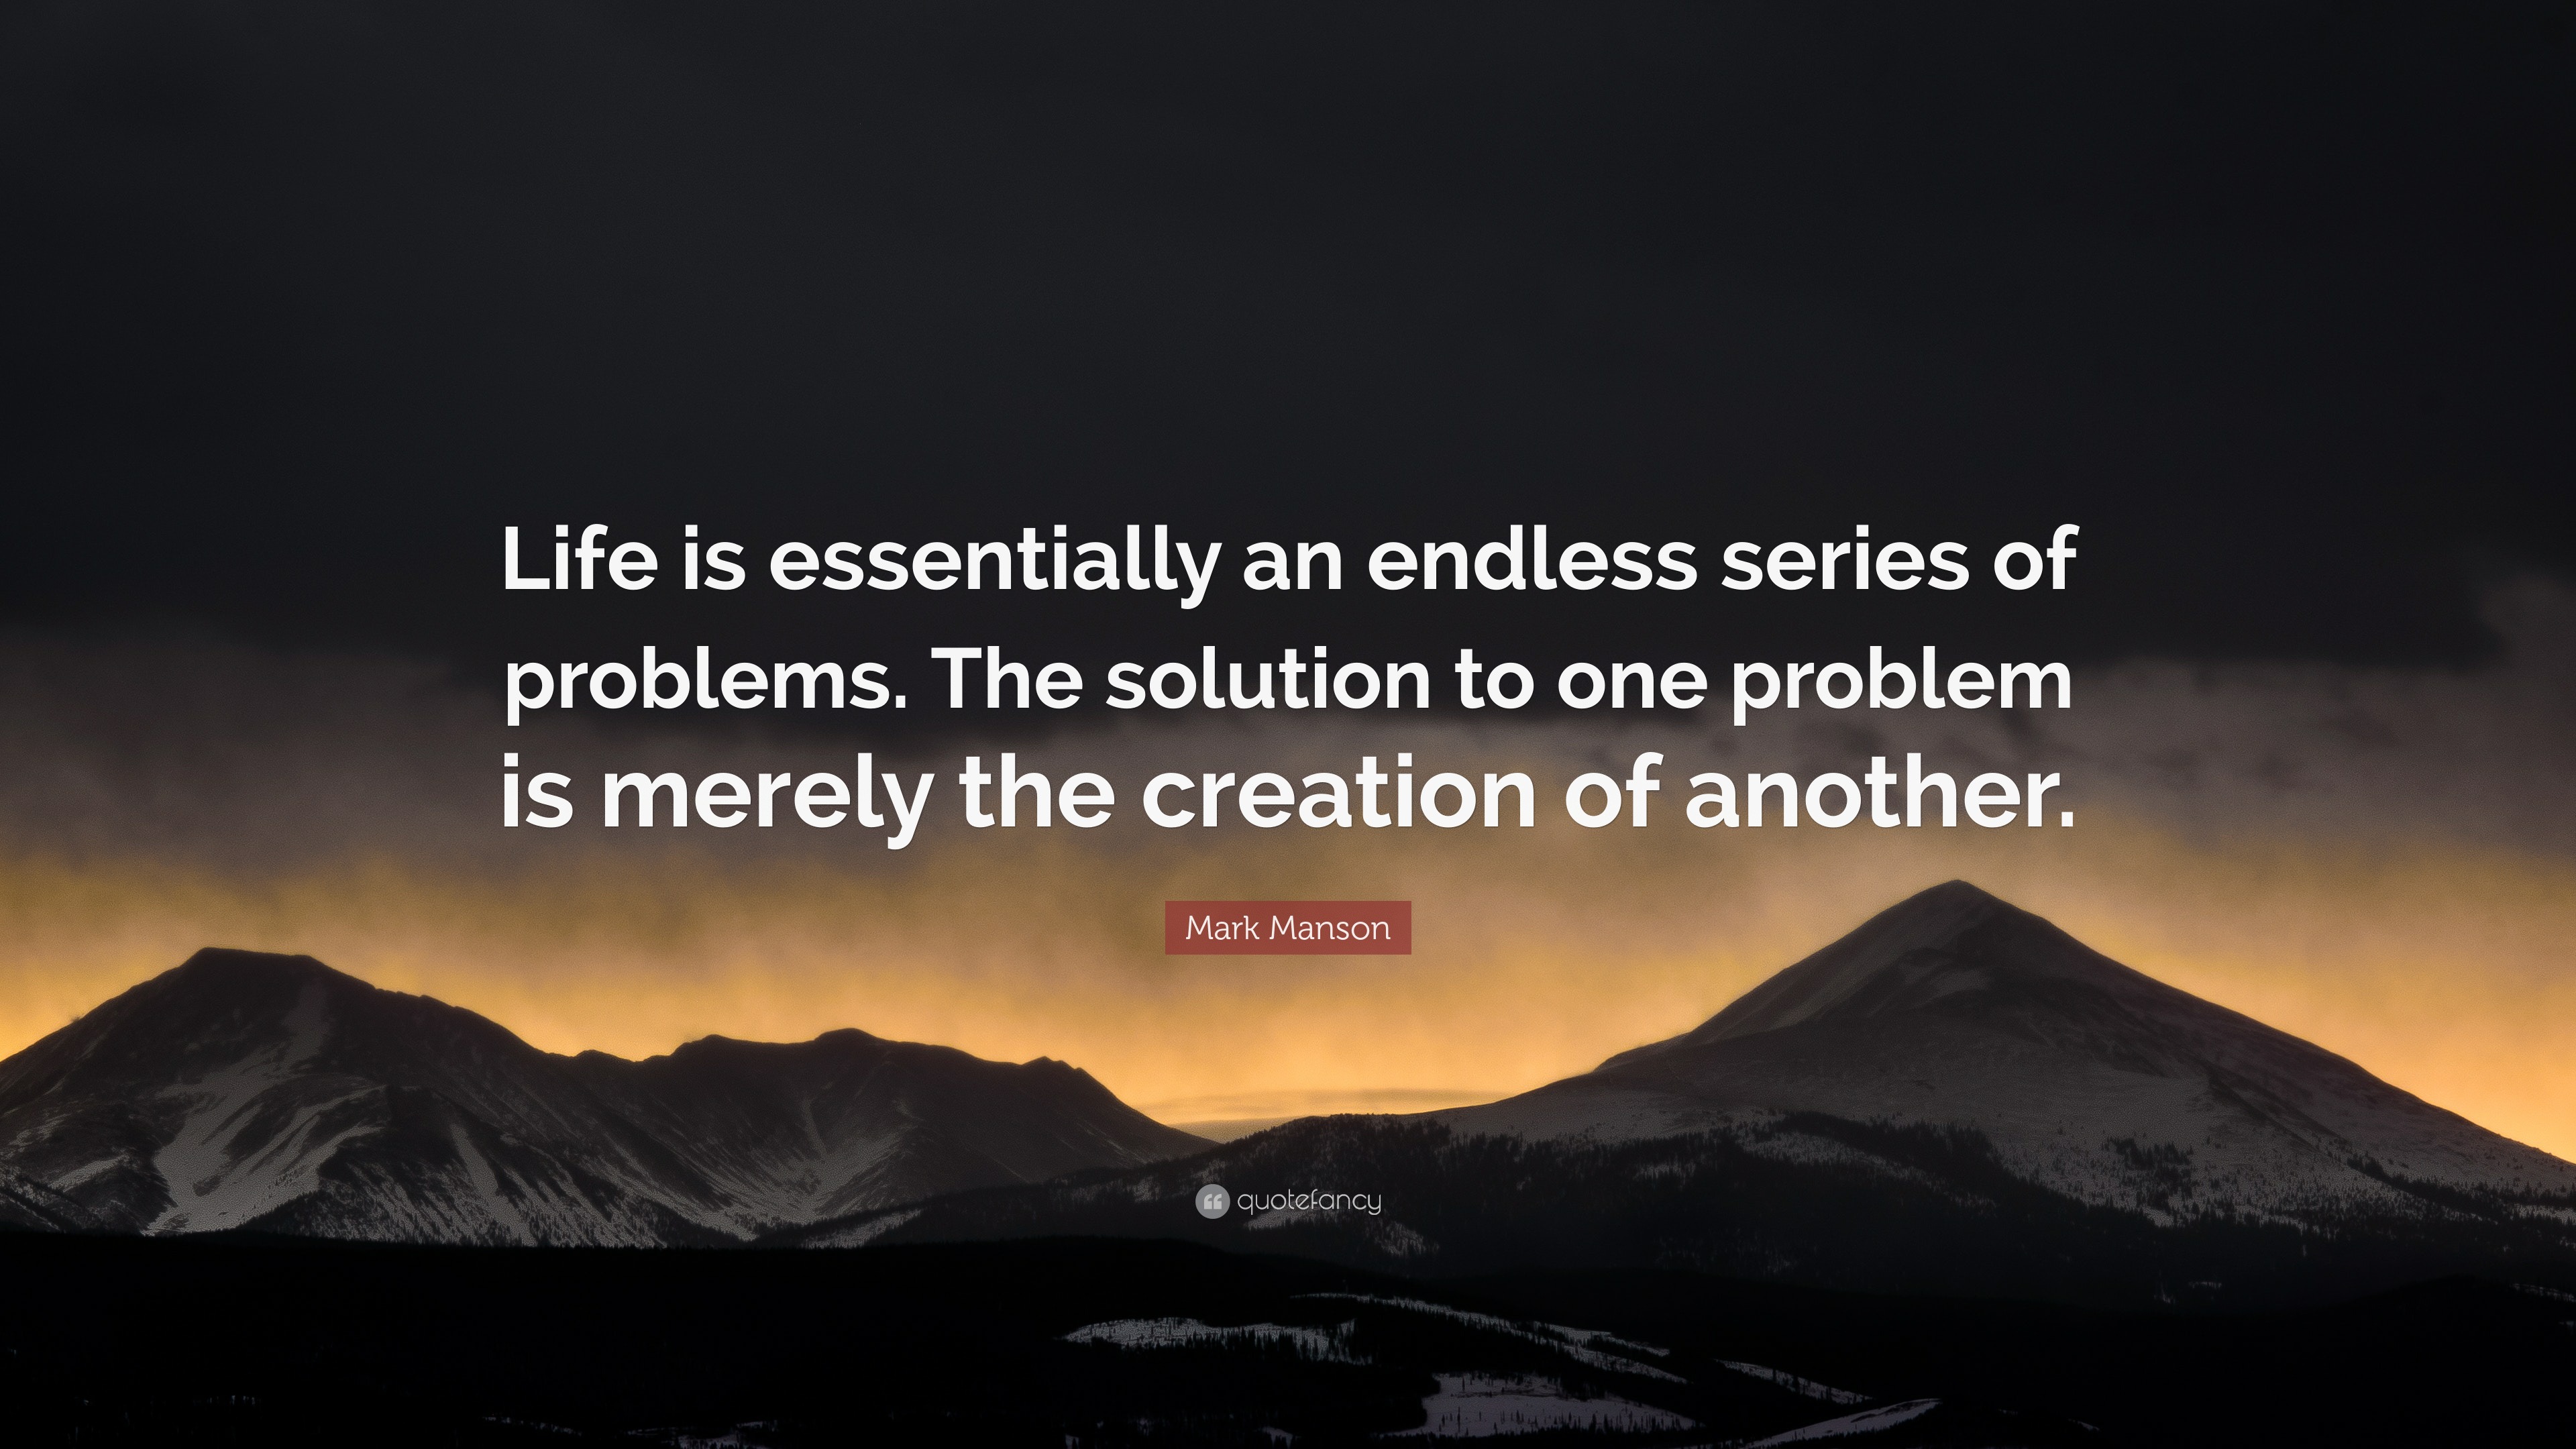 Mark Manson Quote: “Life is essentially an endless series of problems